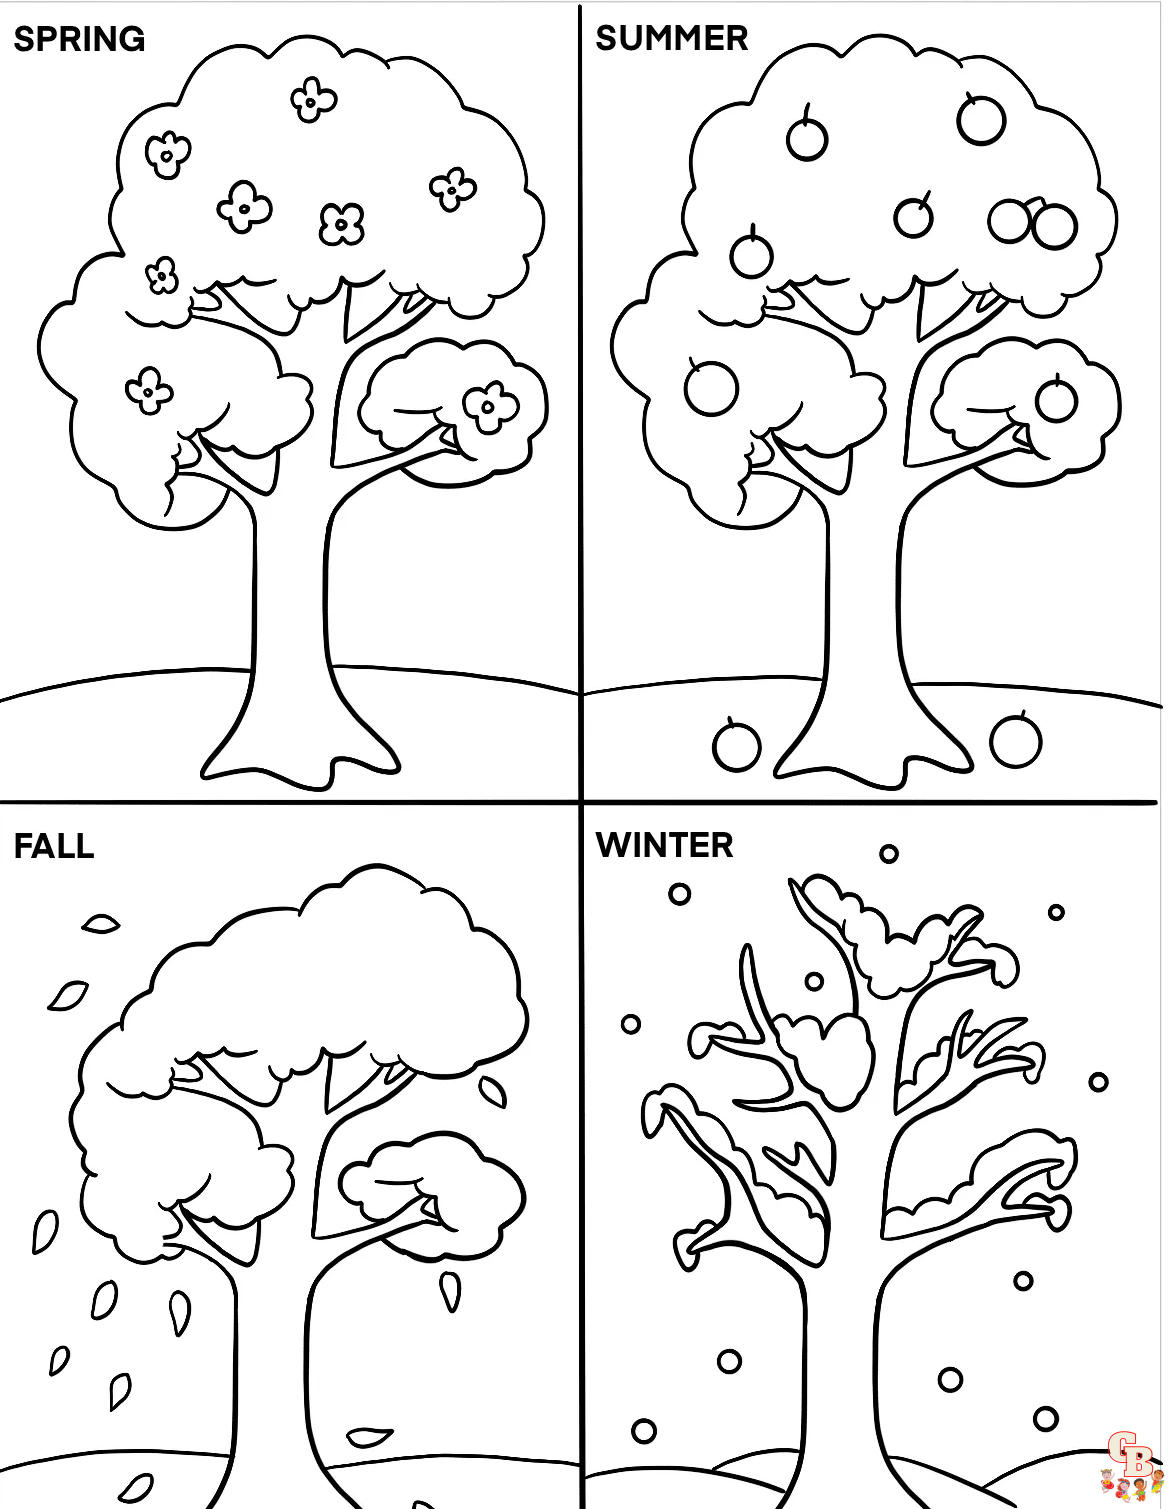 Seasons Coloring Pages 1